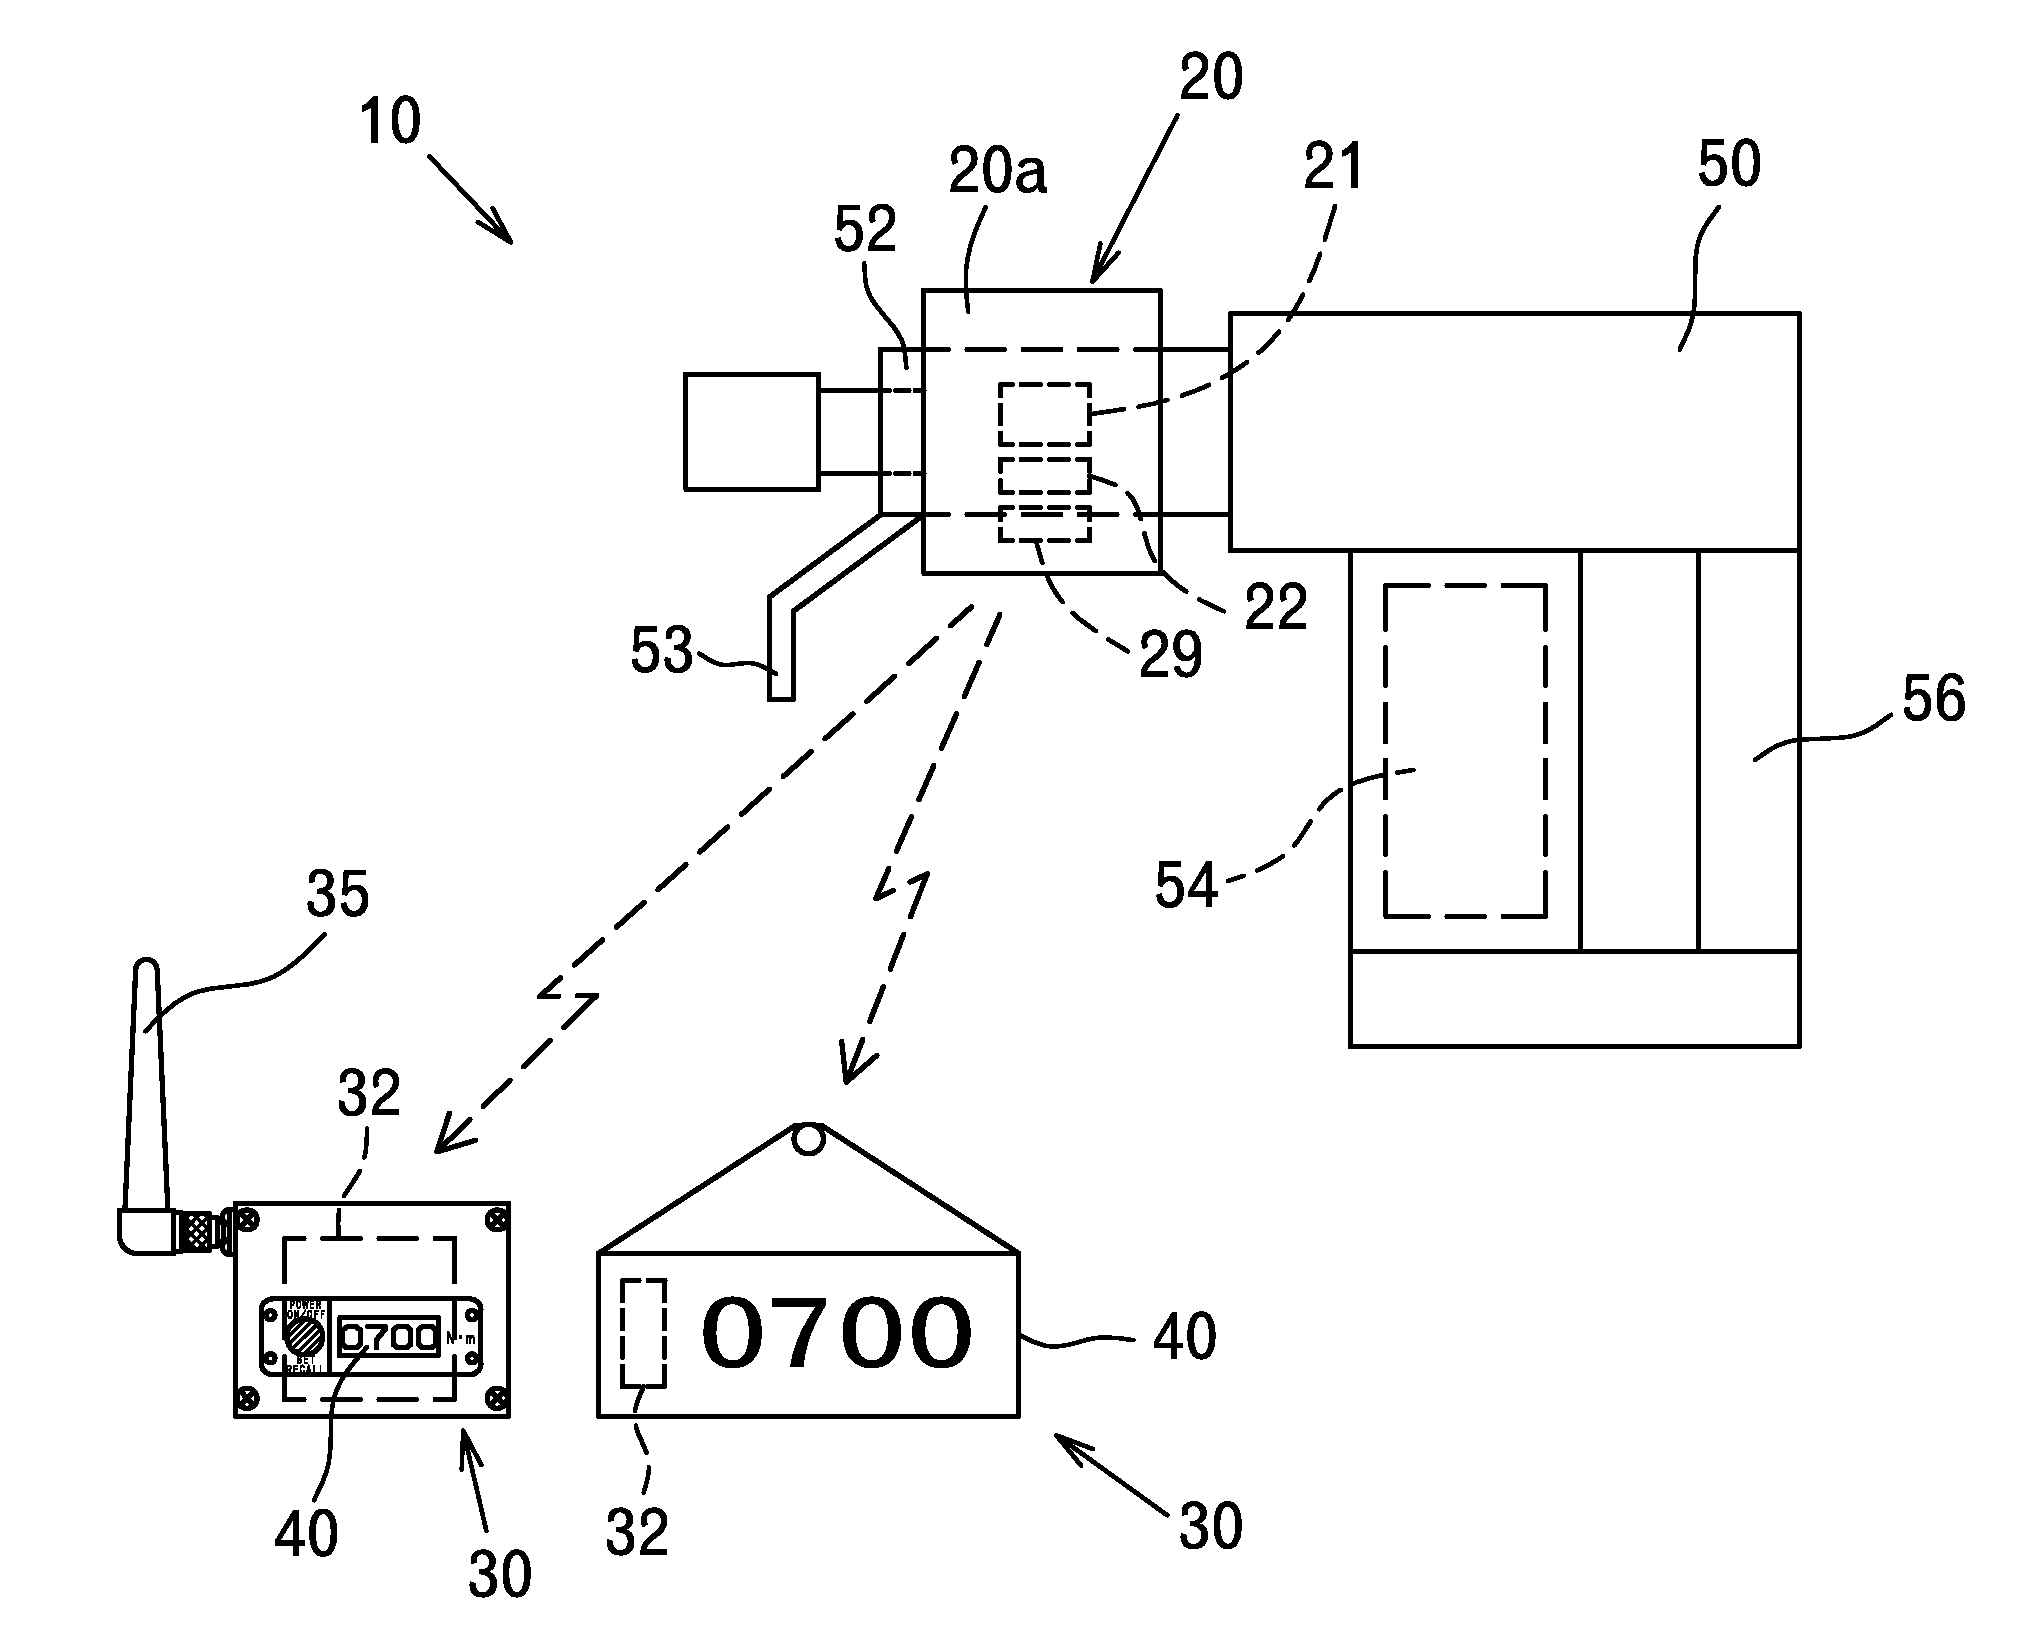 Wireless data transmitting and receiving system